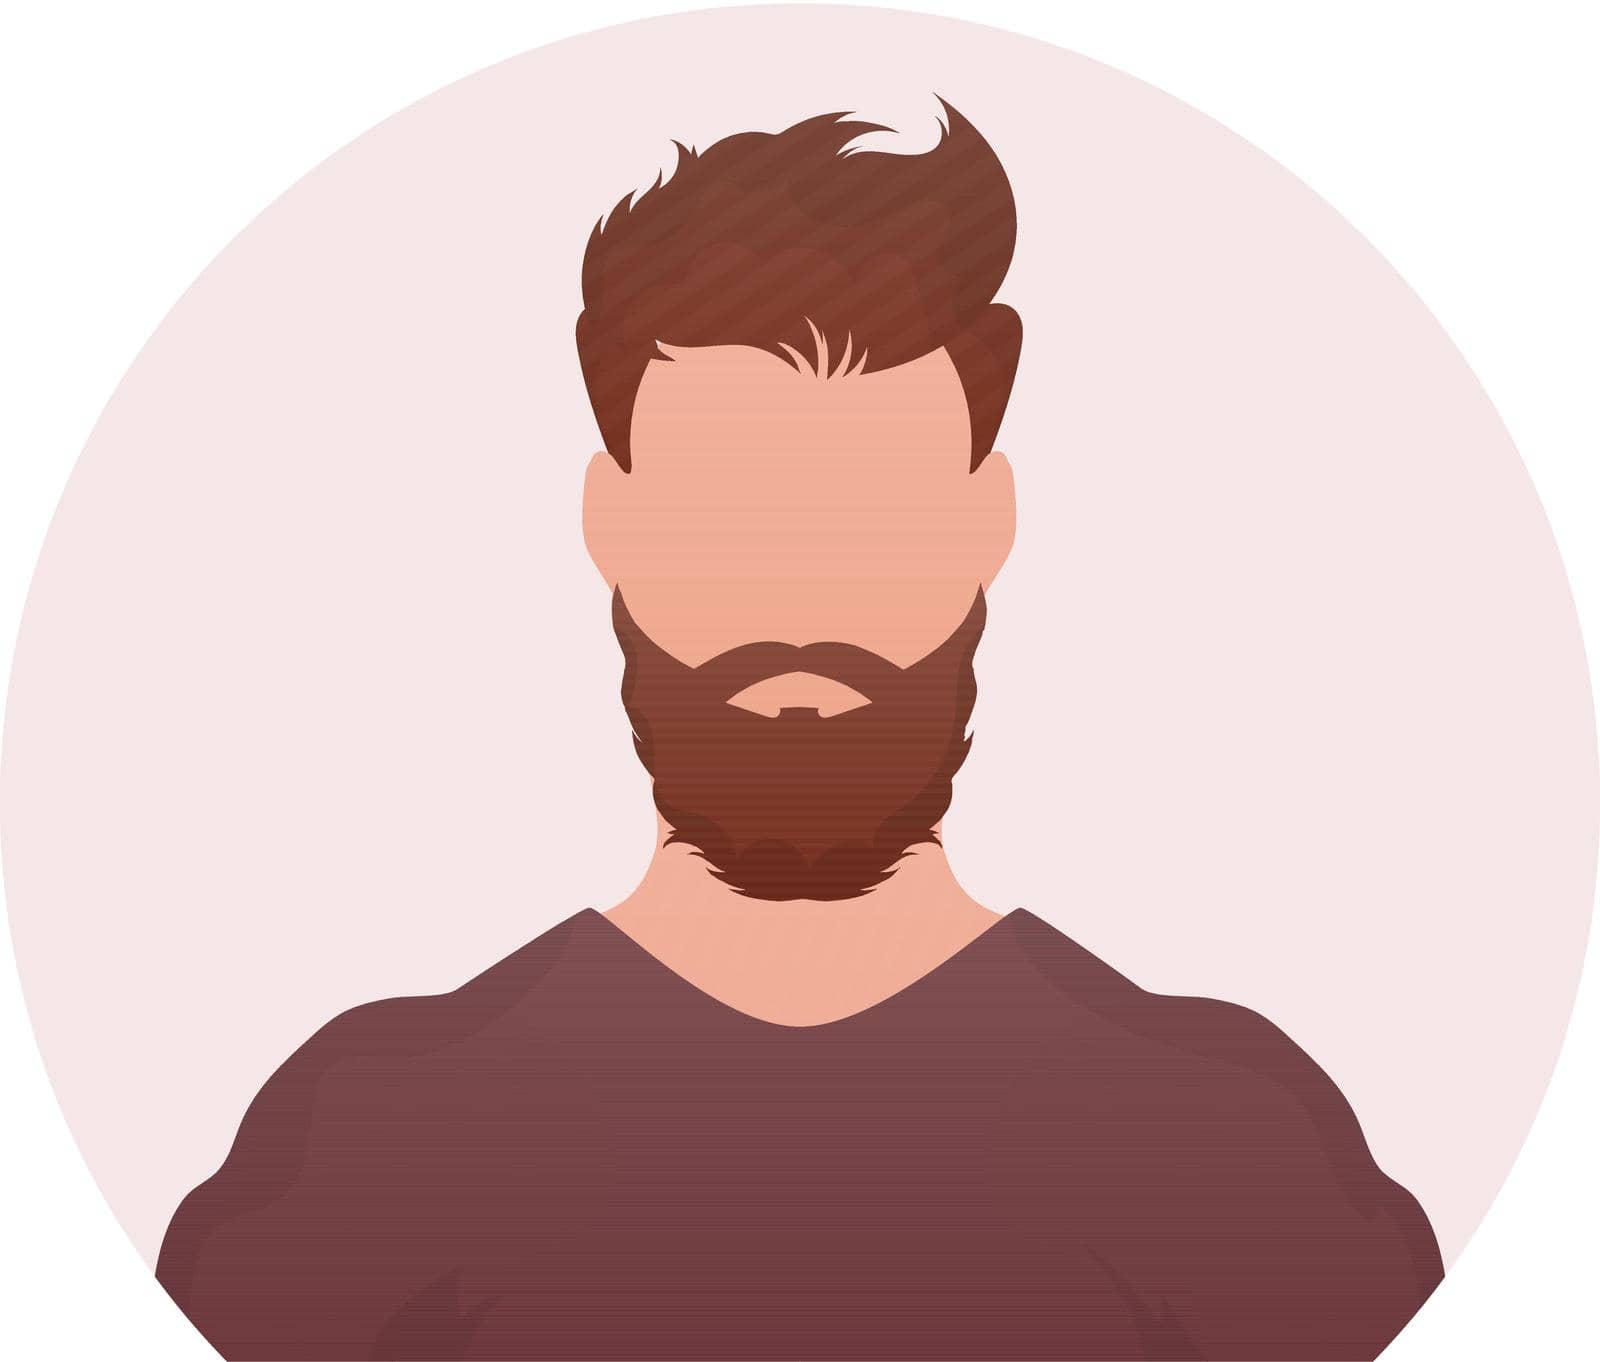 Brutal guy icon. Isolated. Cartoon style. Vector illustration